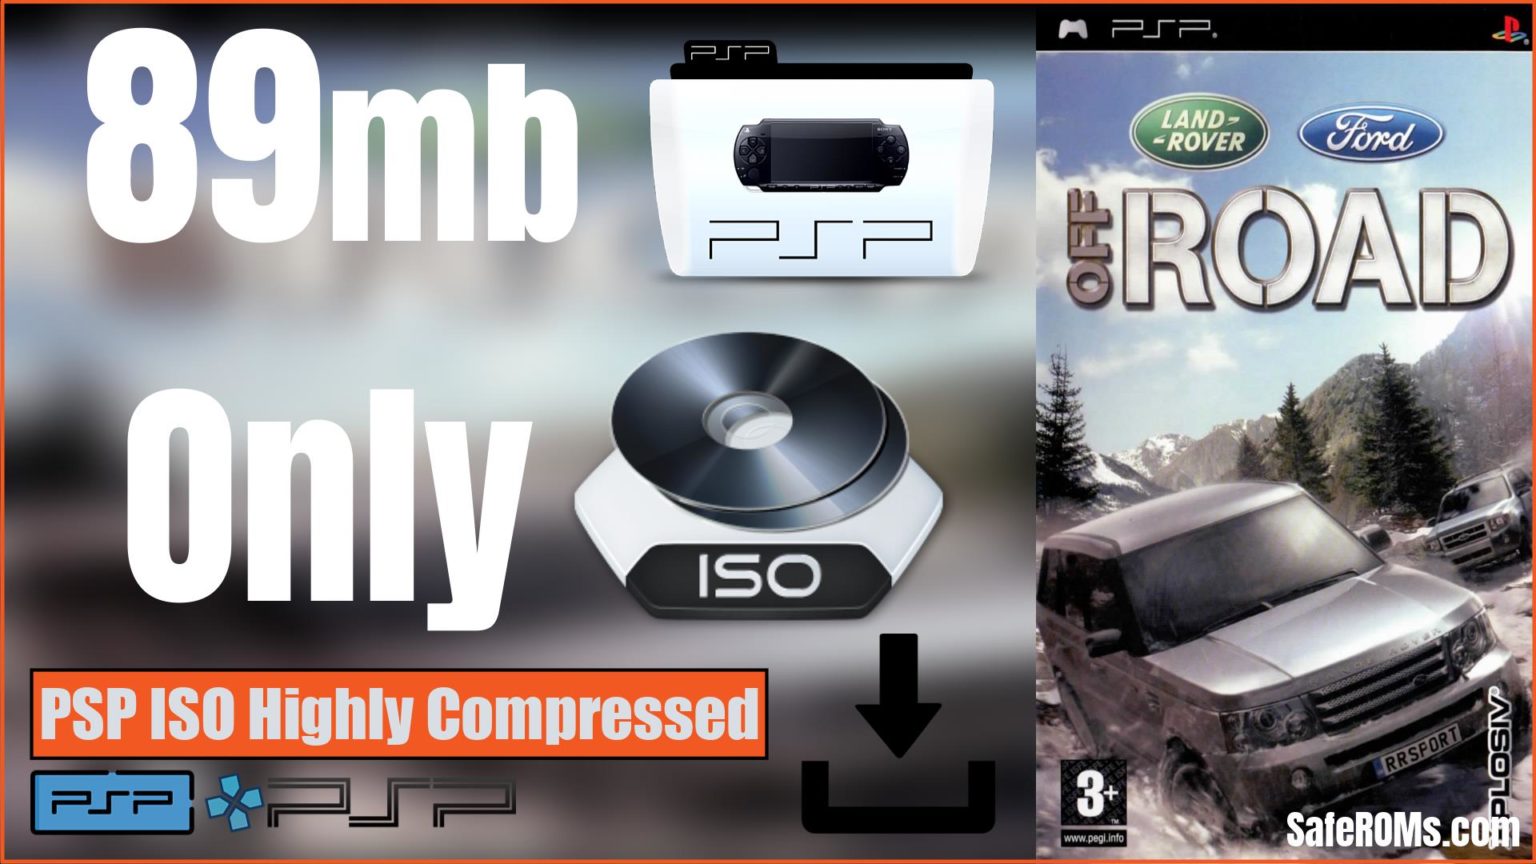 ps2 iso highly compressed rar